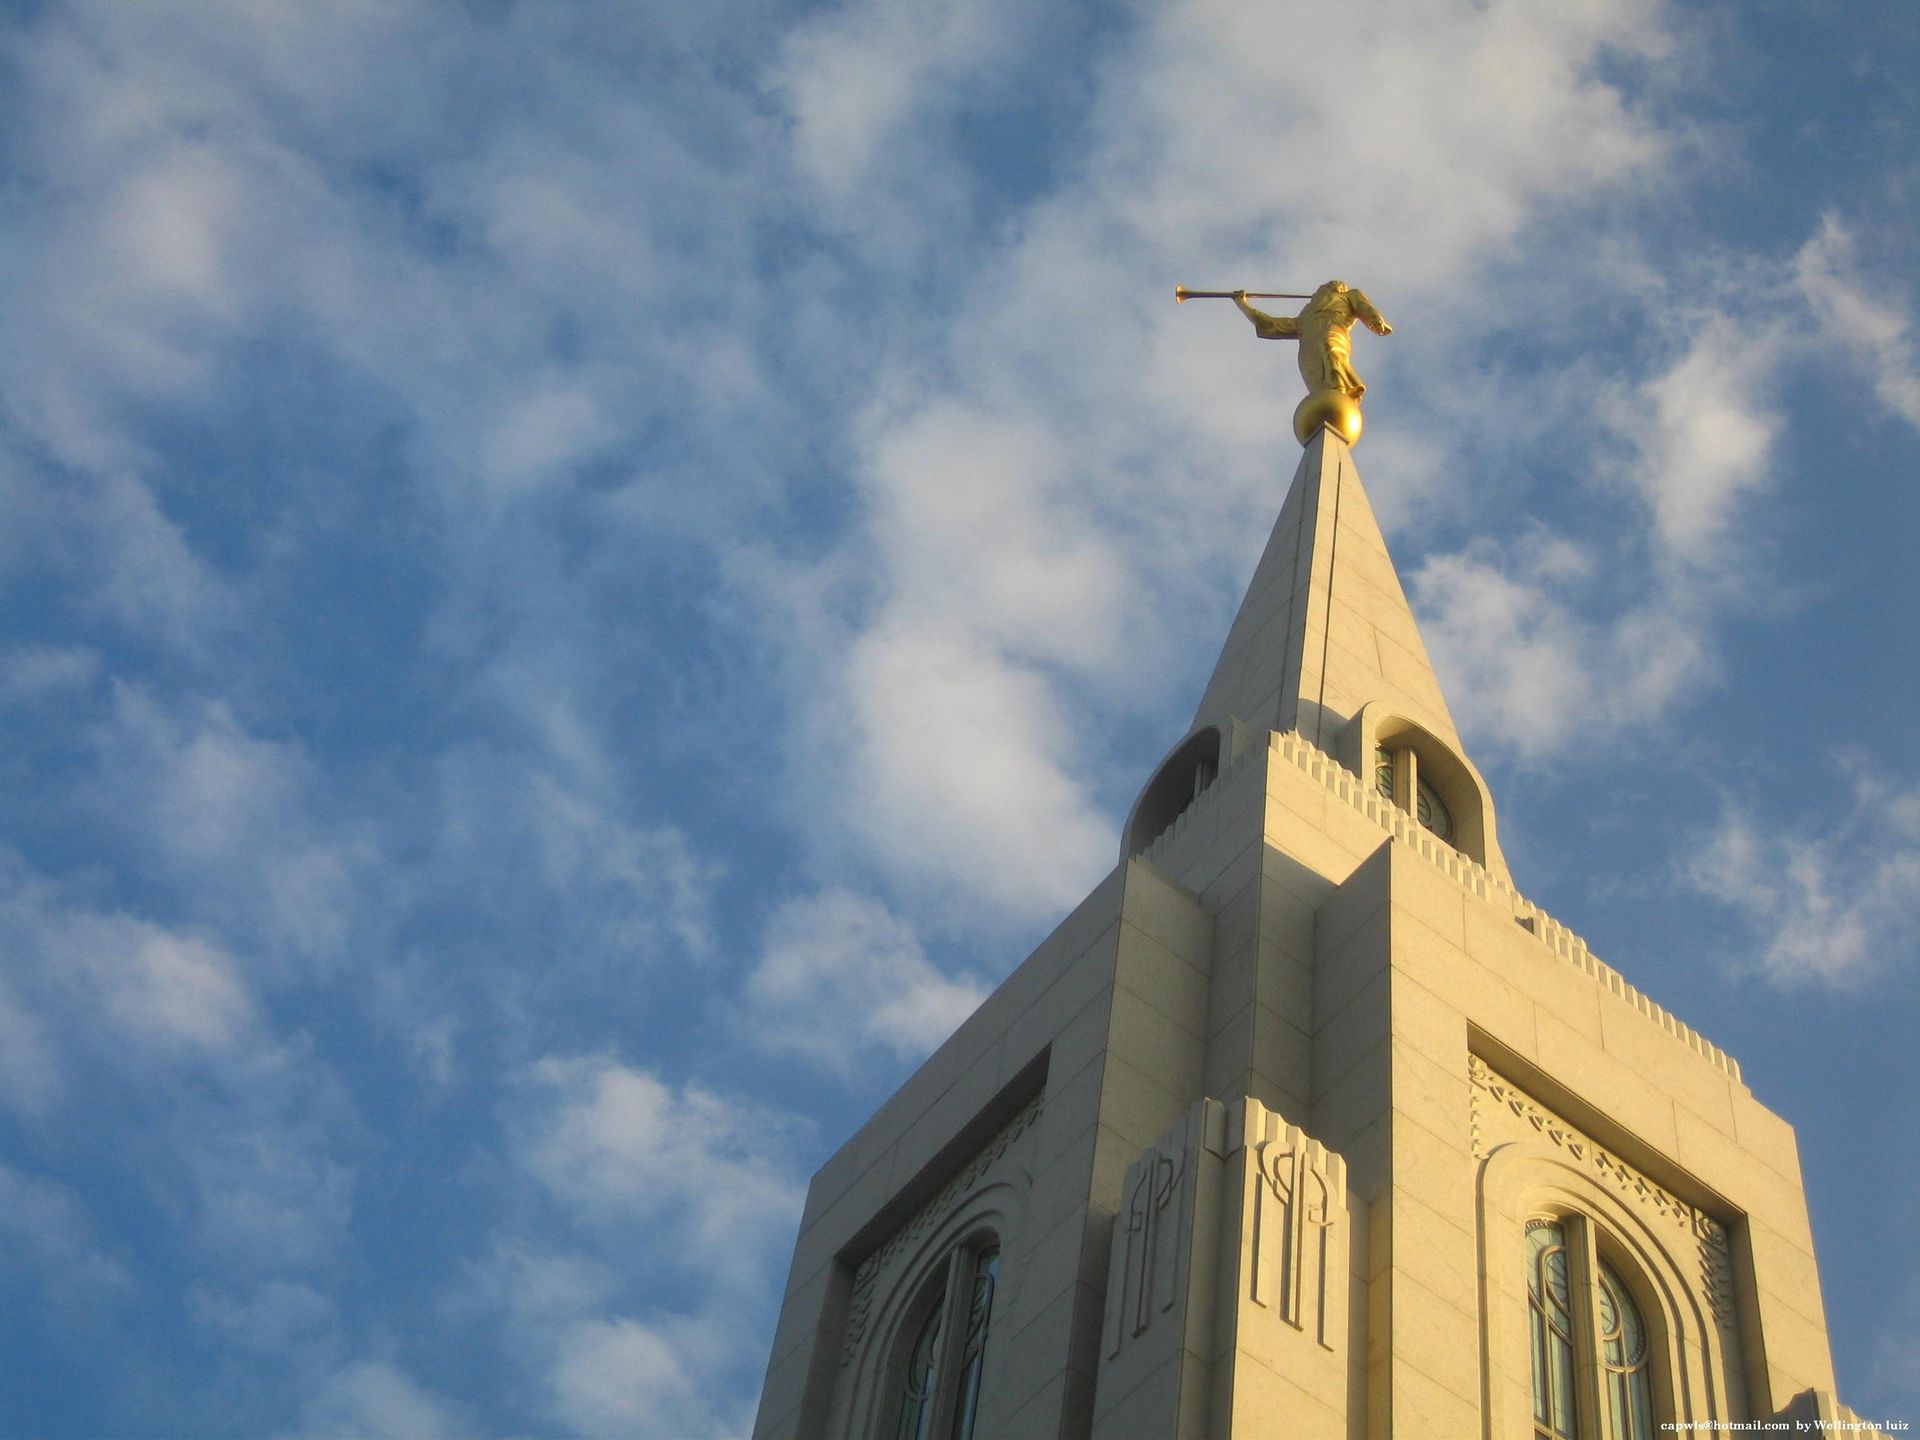 The angel Moroni stands on top of the spire of the Curitiba Brazil Temple.